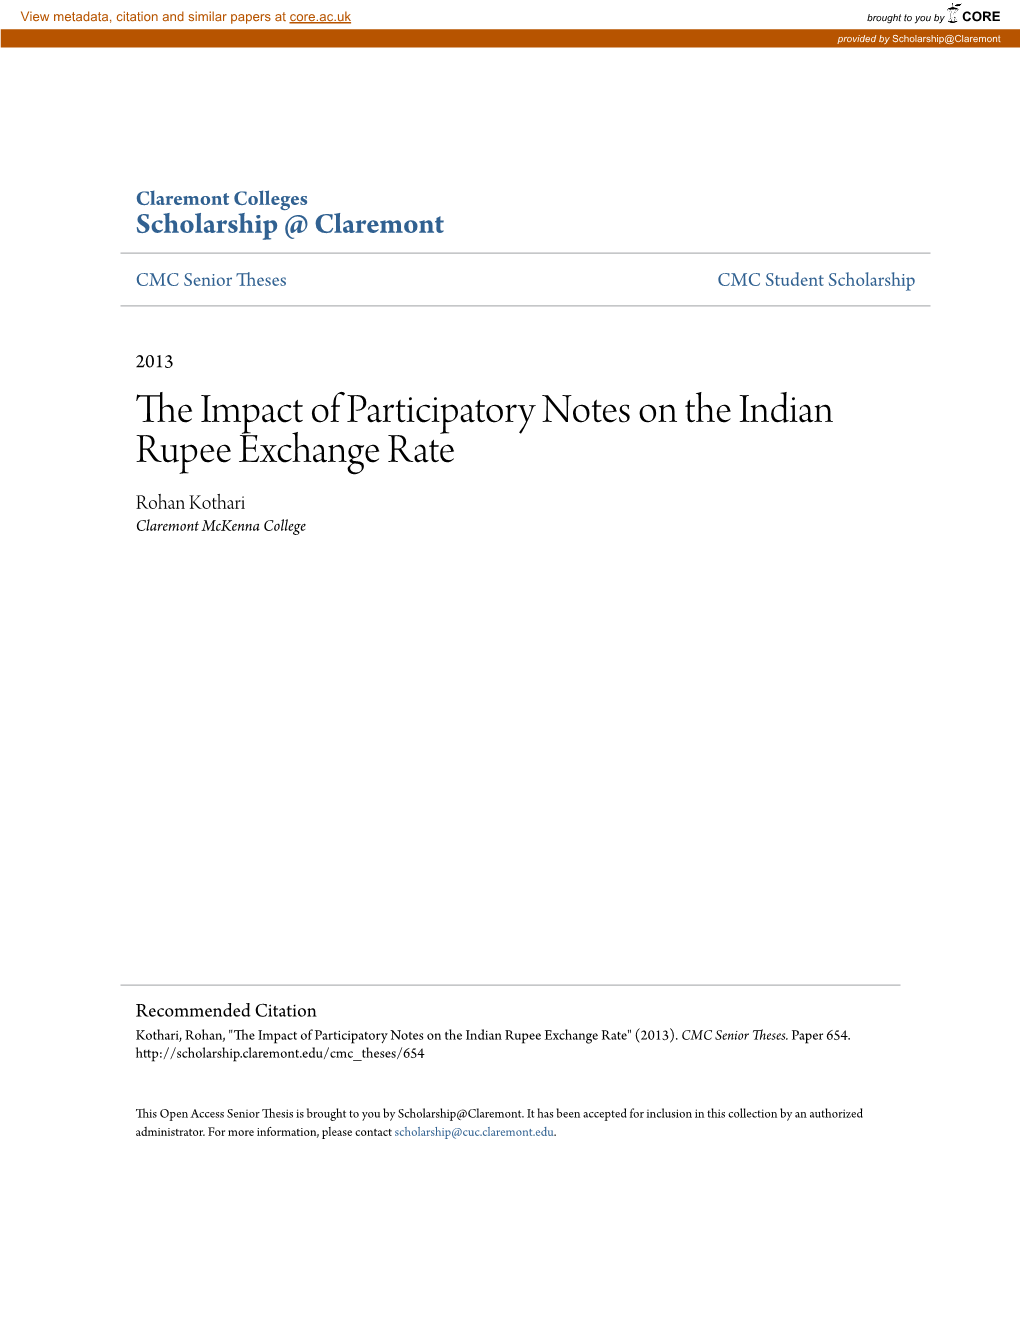 The Impact of Participatory Notes on the Indian Rupee Exchange Rate